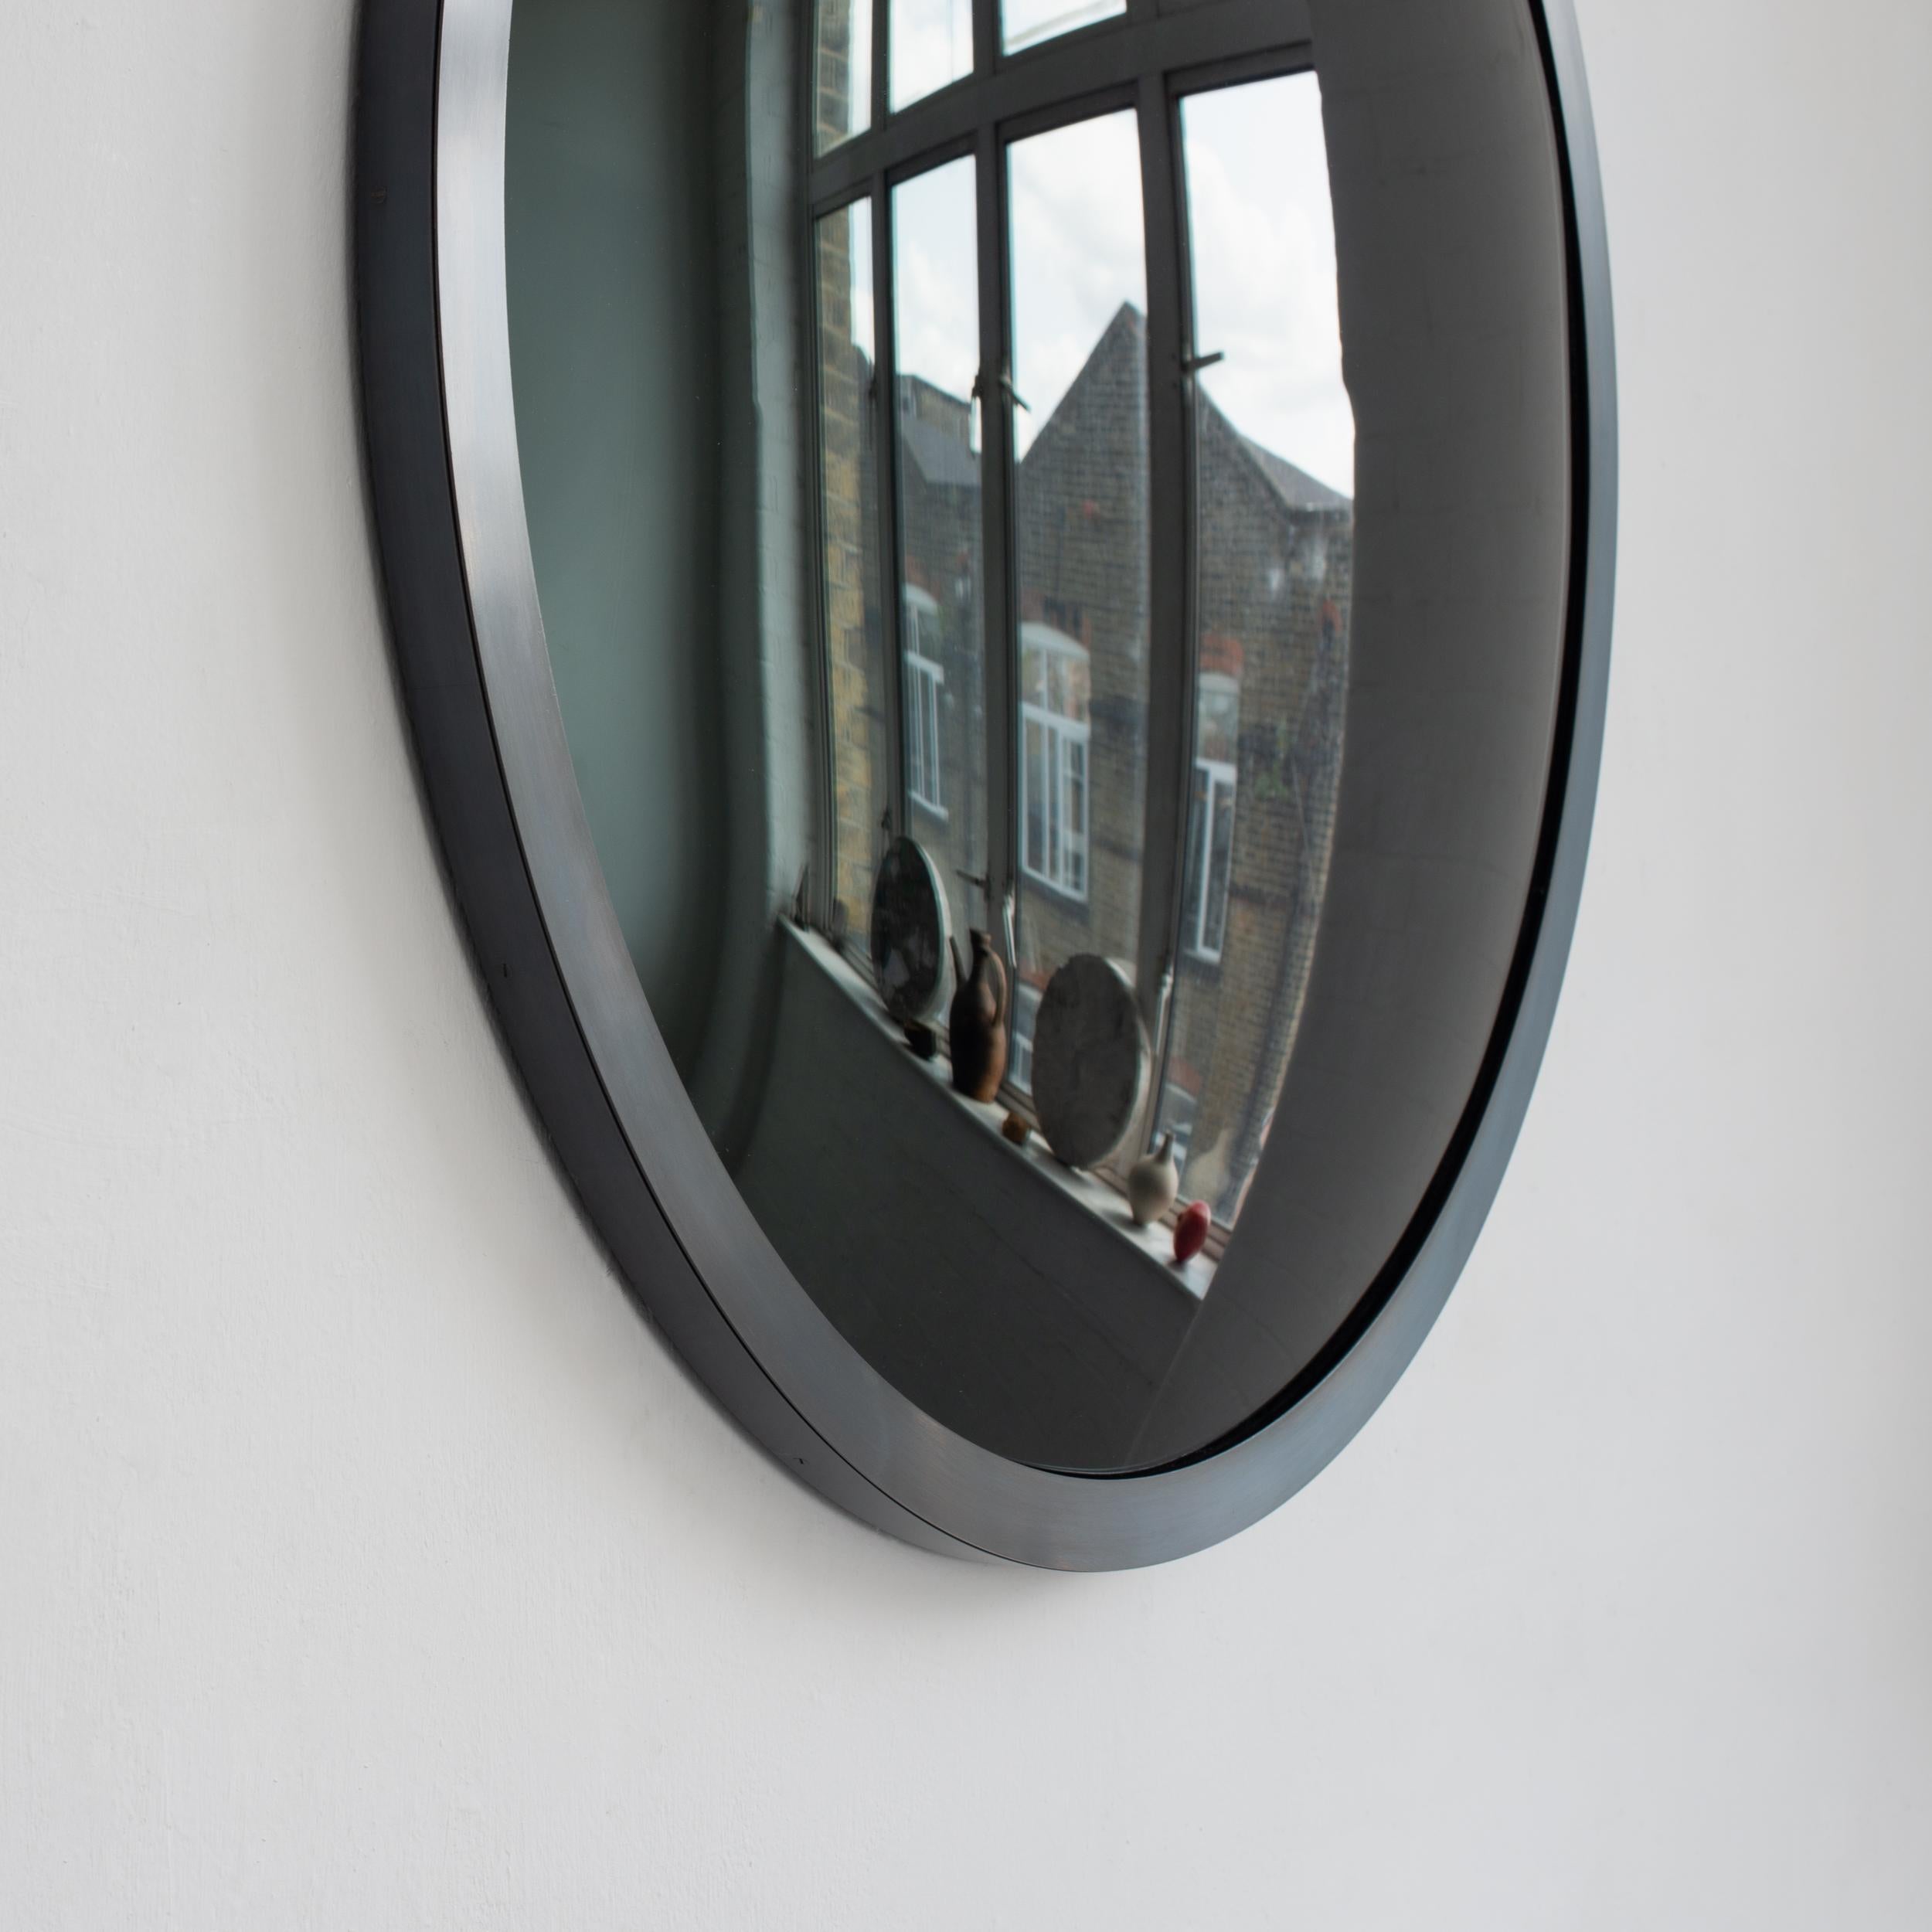 In Stock Orbis Round Black Tinted Convex Mirror, Blackened Metal Frame, Large For Sale 1